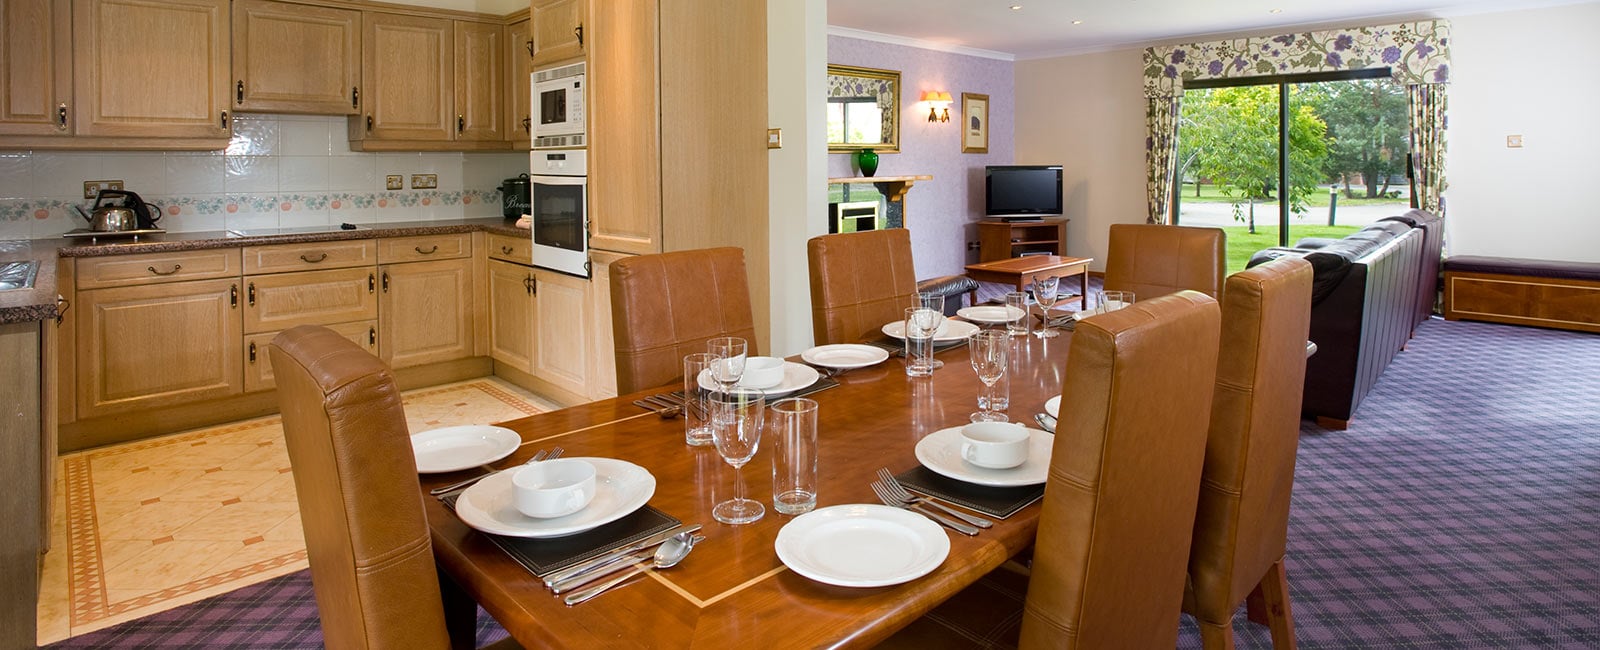 Dining Area and Kitchen at Hilton Grand Vacations Club at Coylumbridge in Inverness-shire, Scotland